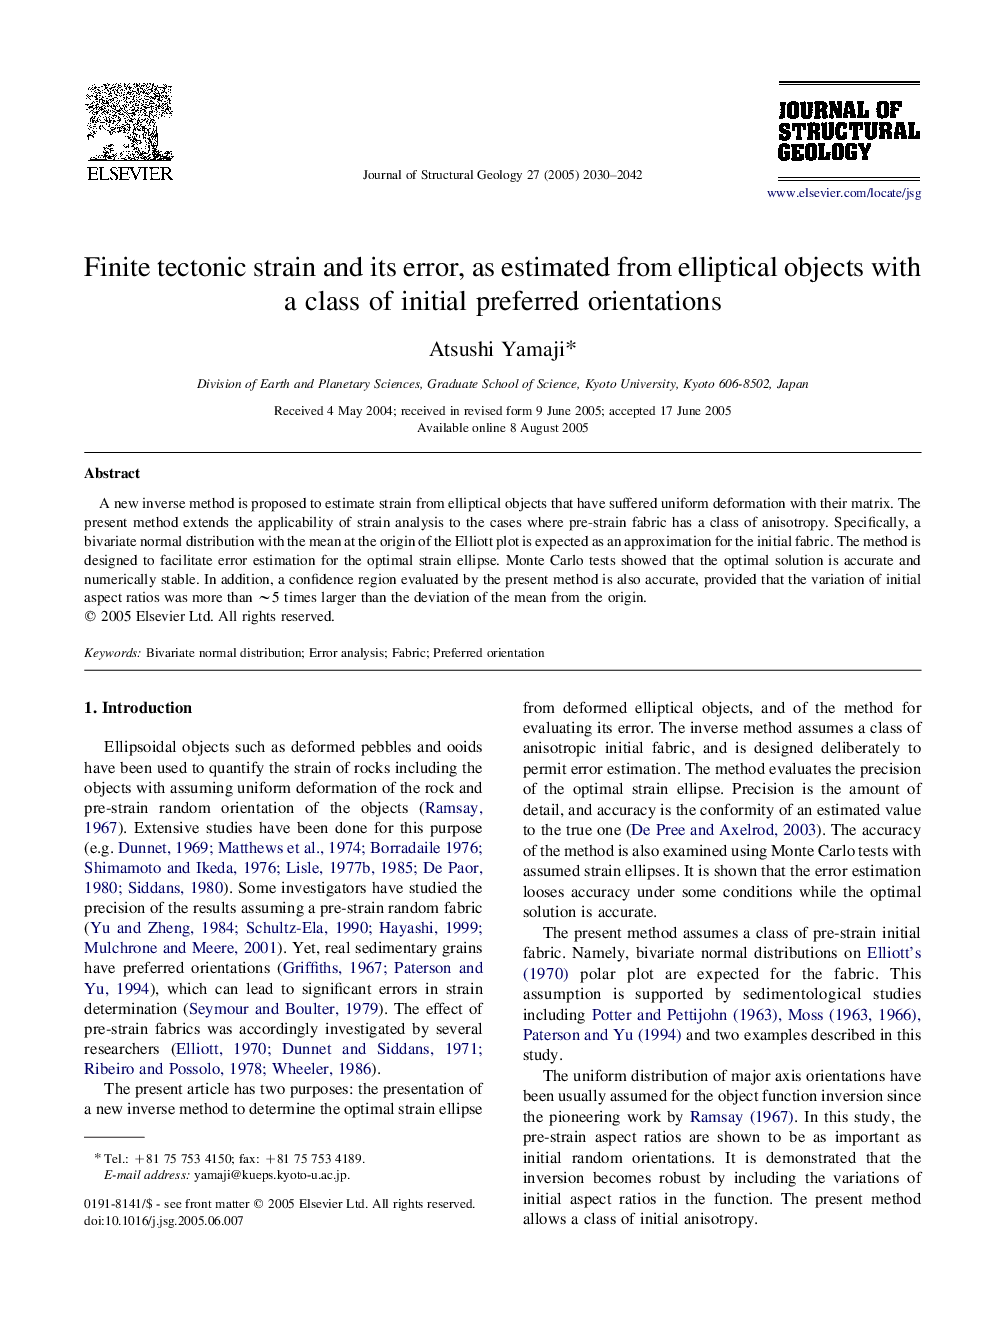 Finite tectonic strain and its error, as estimated from elliptical objects with a class of initial preferred orientations